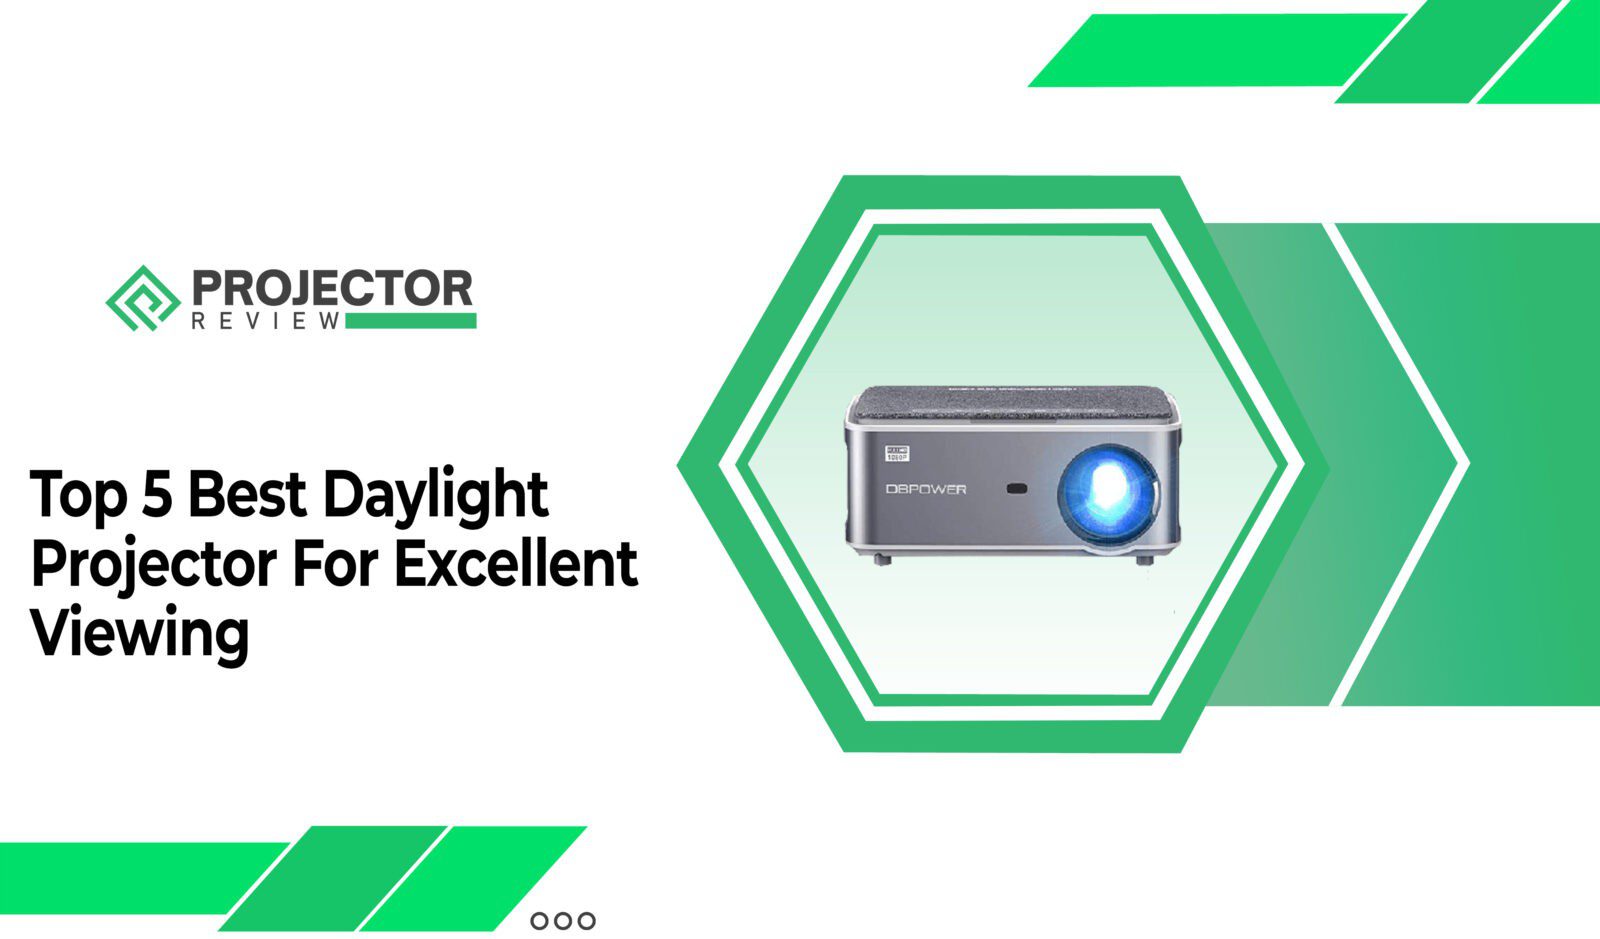 Top 5 Best Daylight Projector For Excellent Viewing